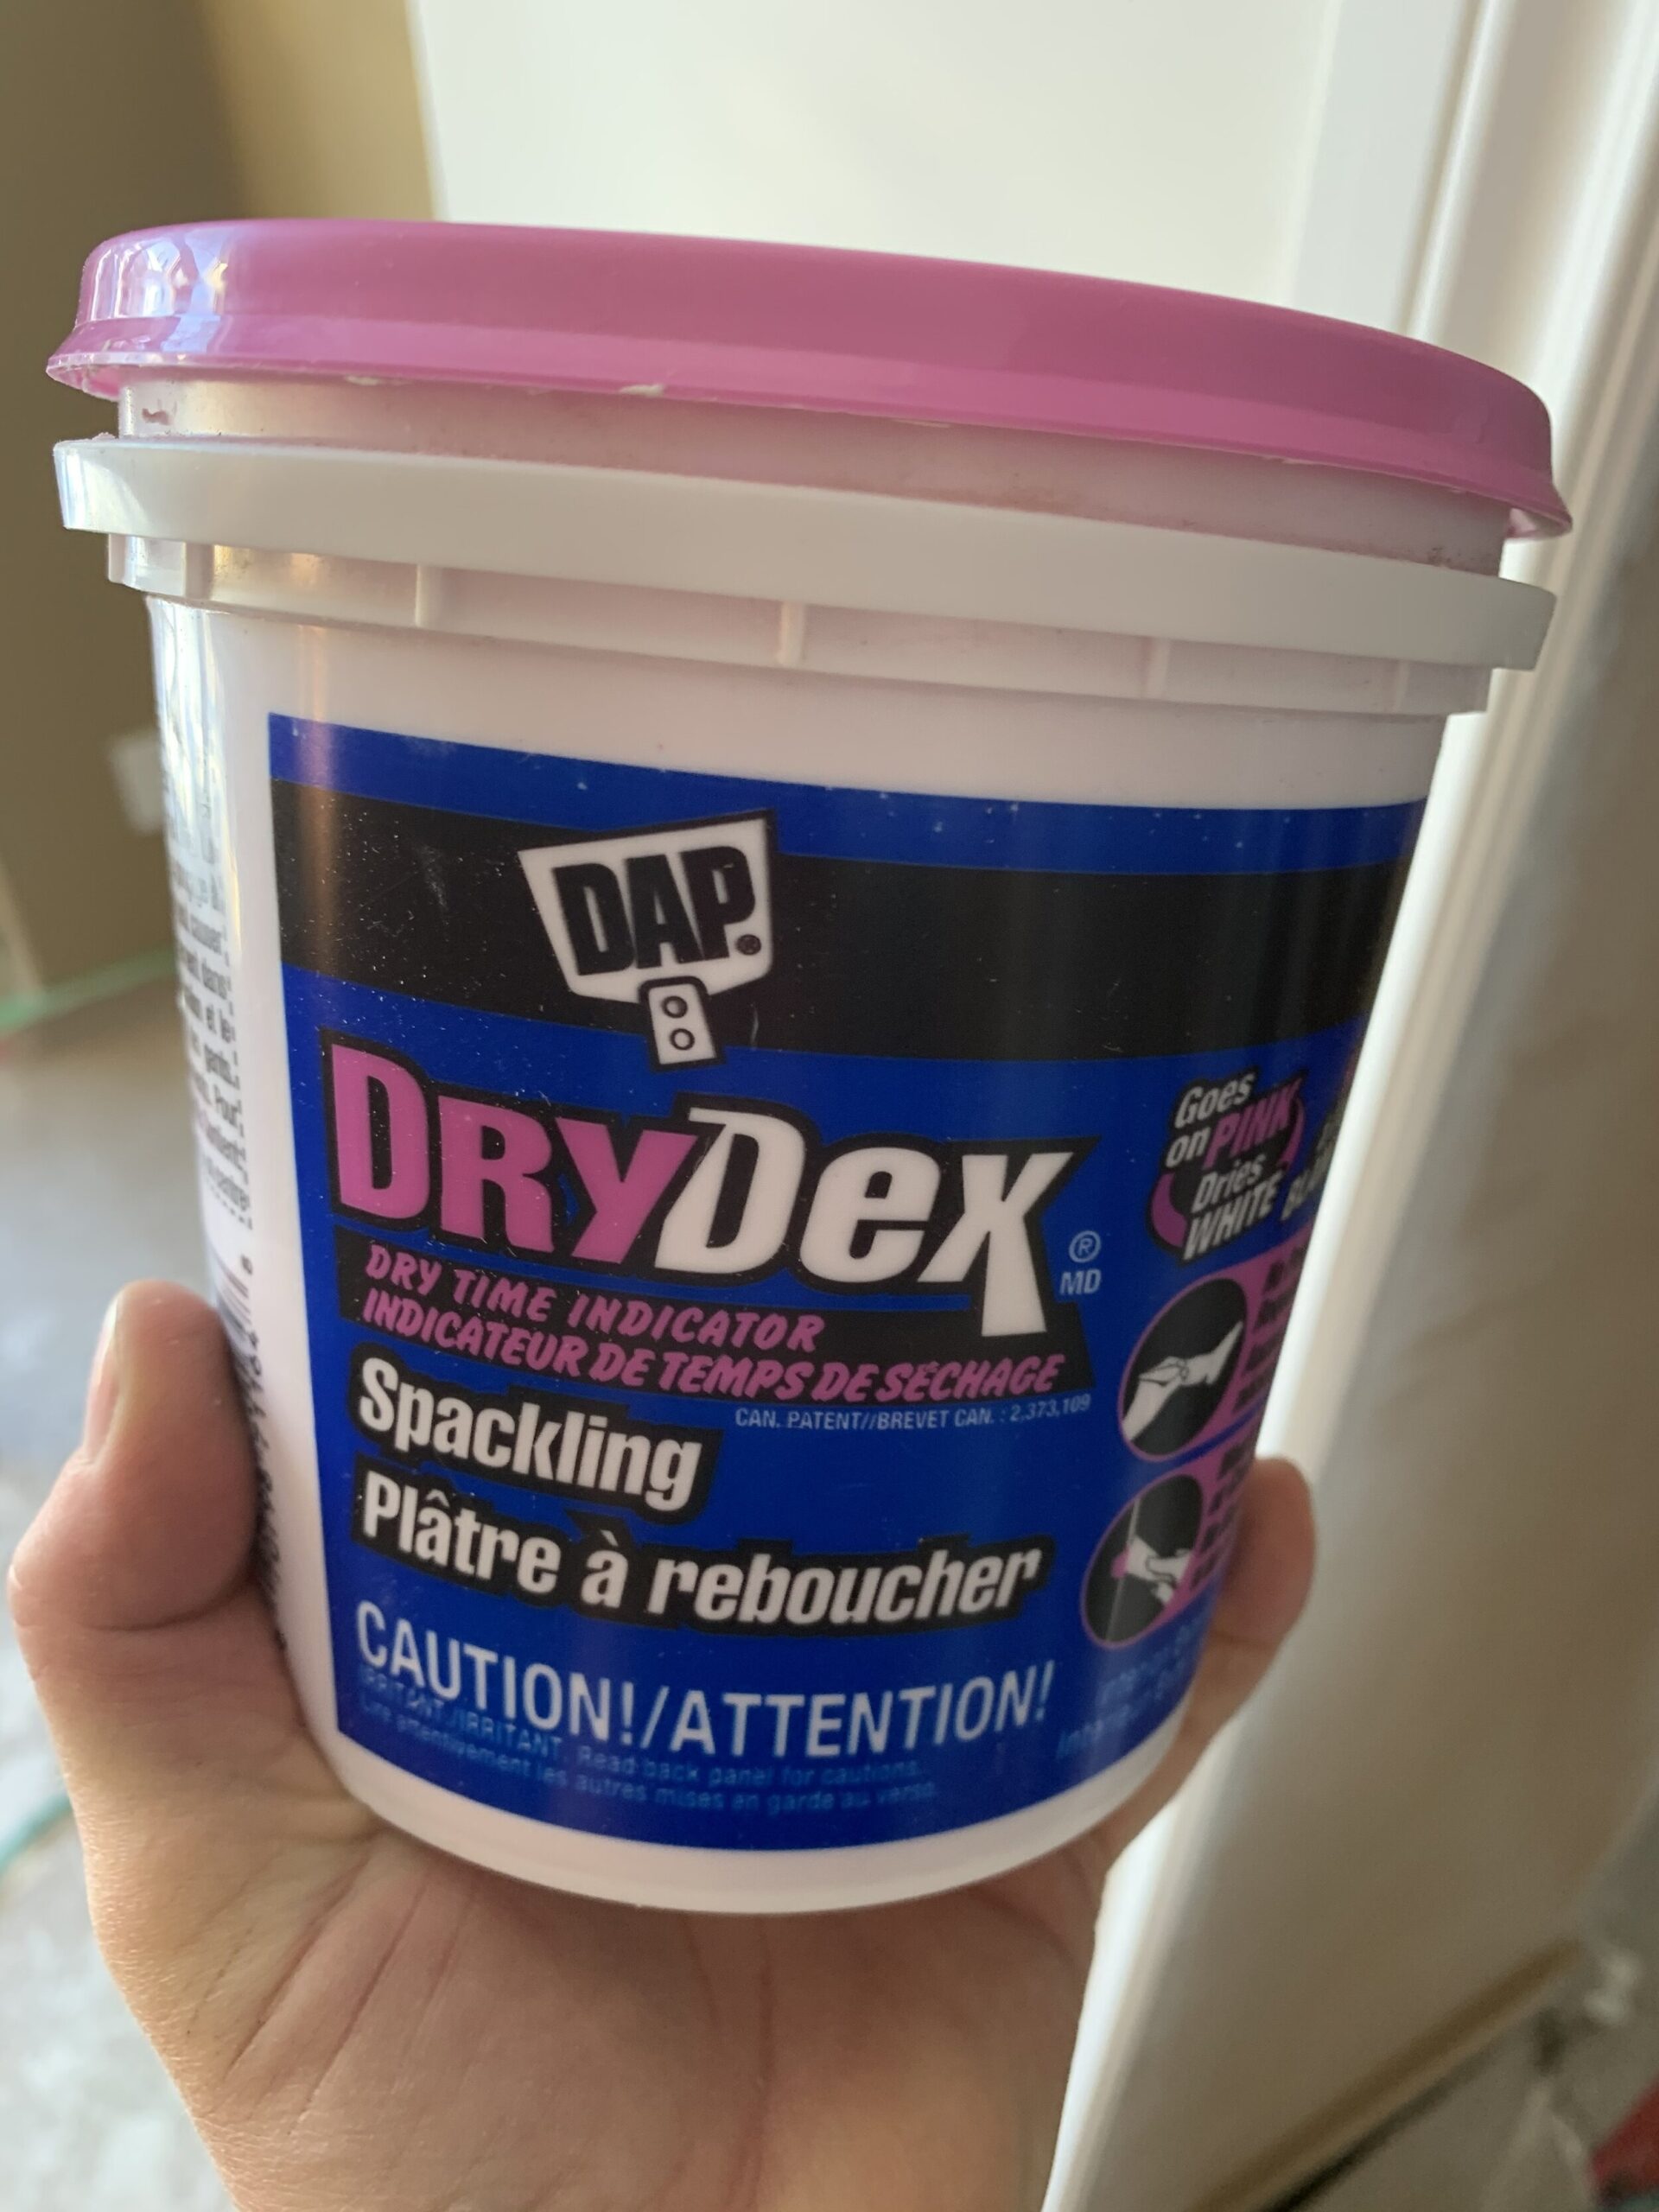 drydex spackling can